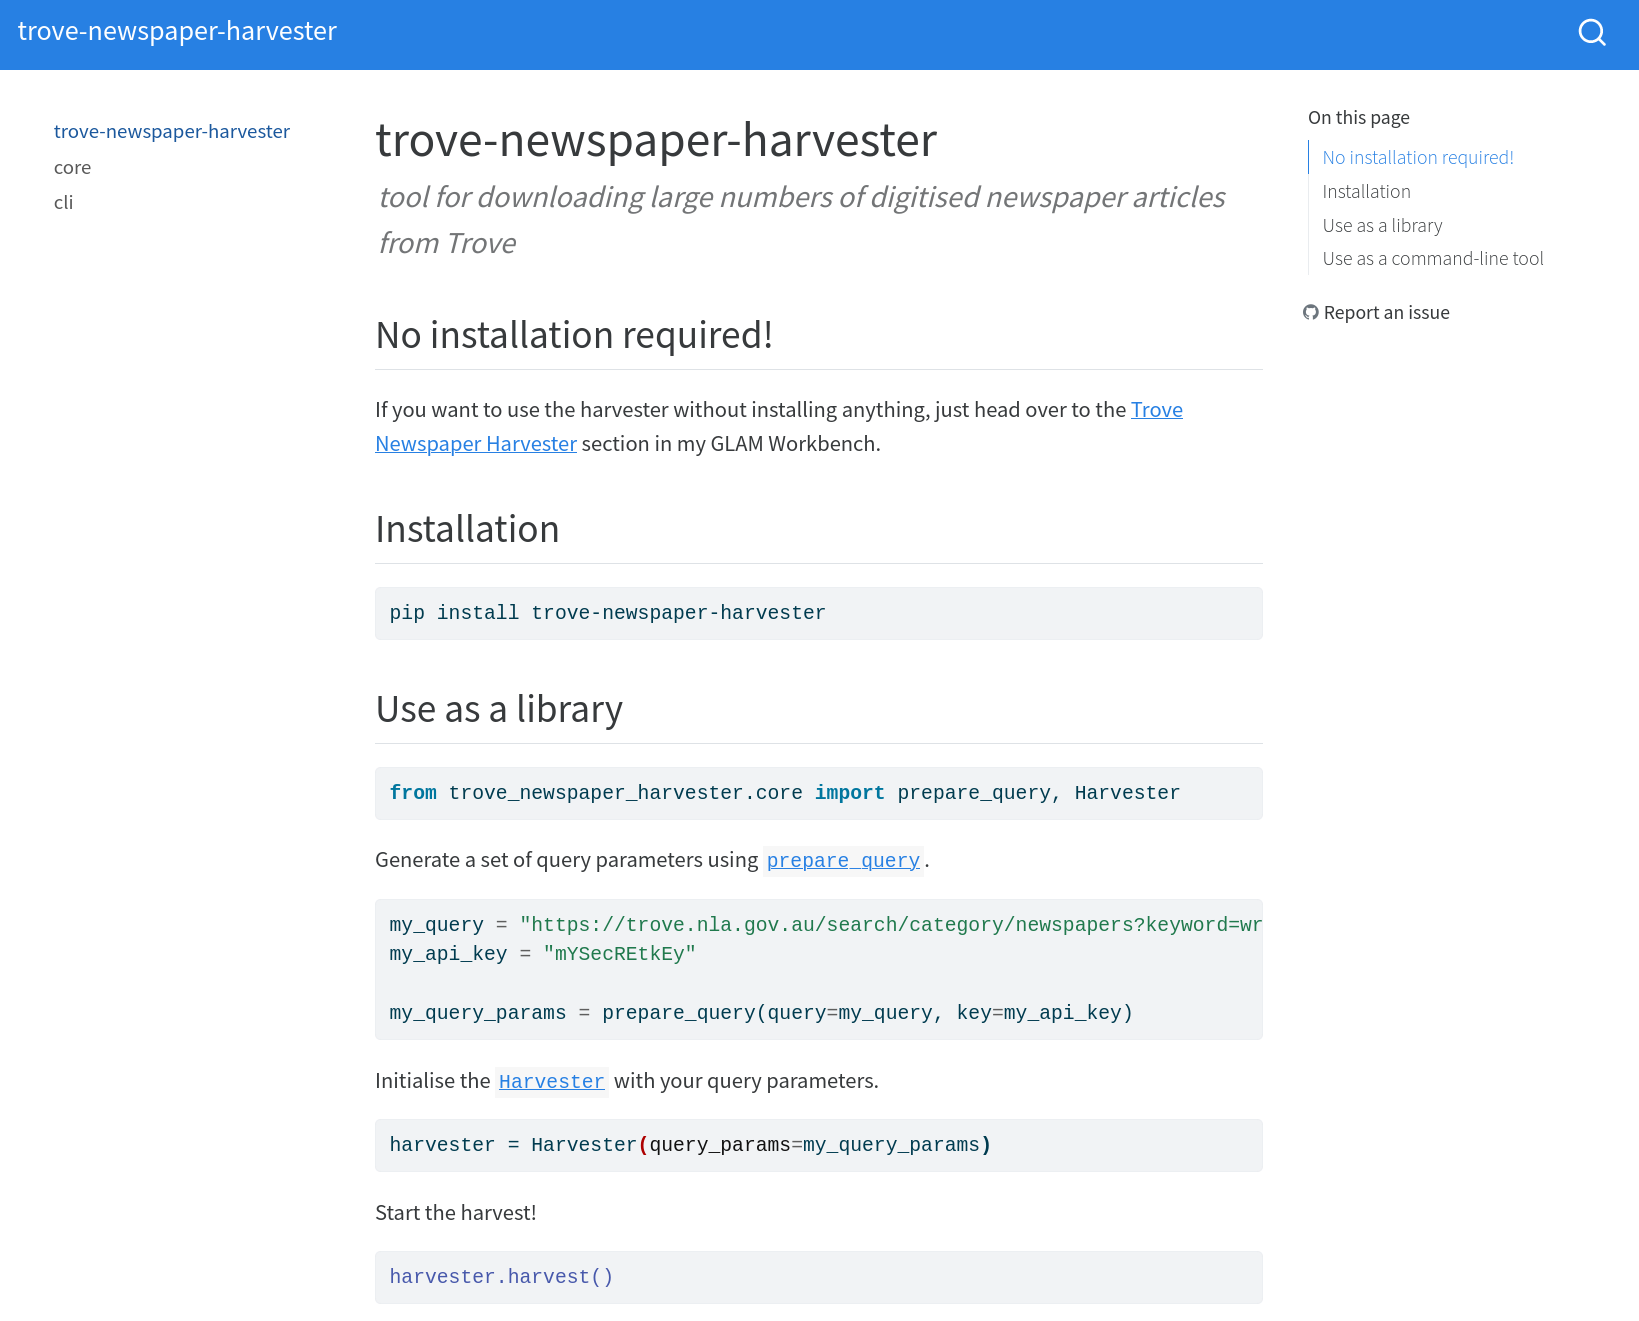 Screenshot of the trove-newspaper-harvester documentation describing its use as a Python library.